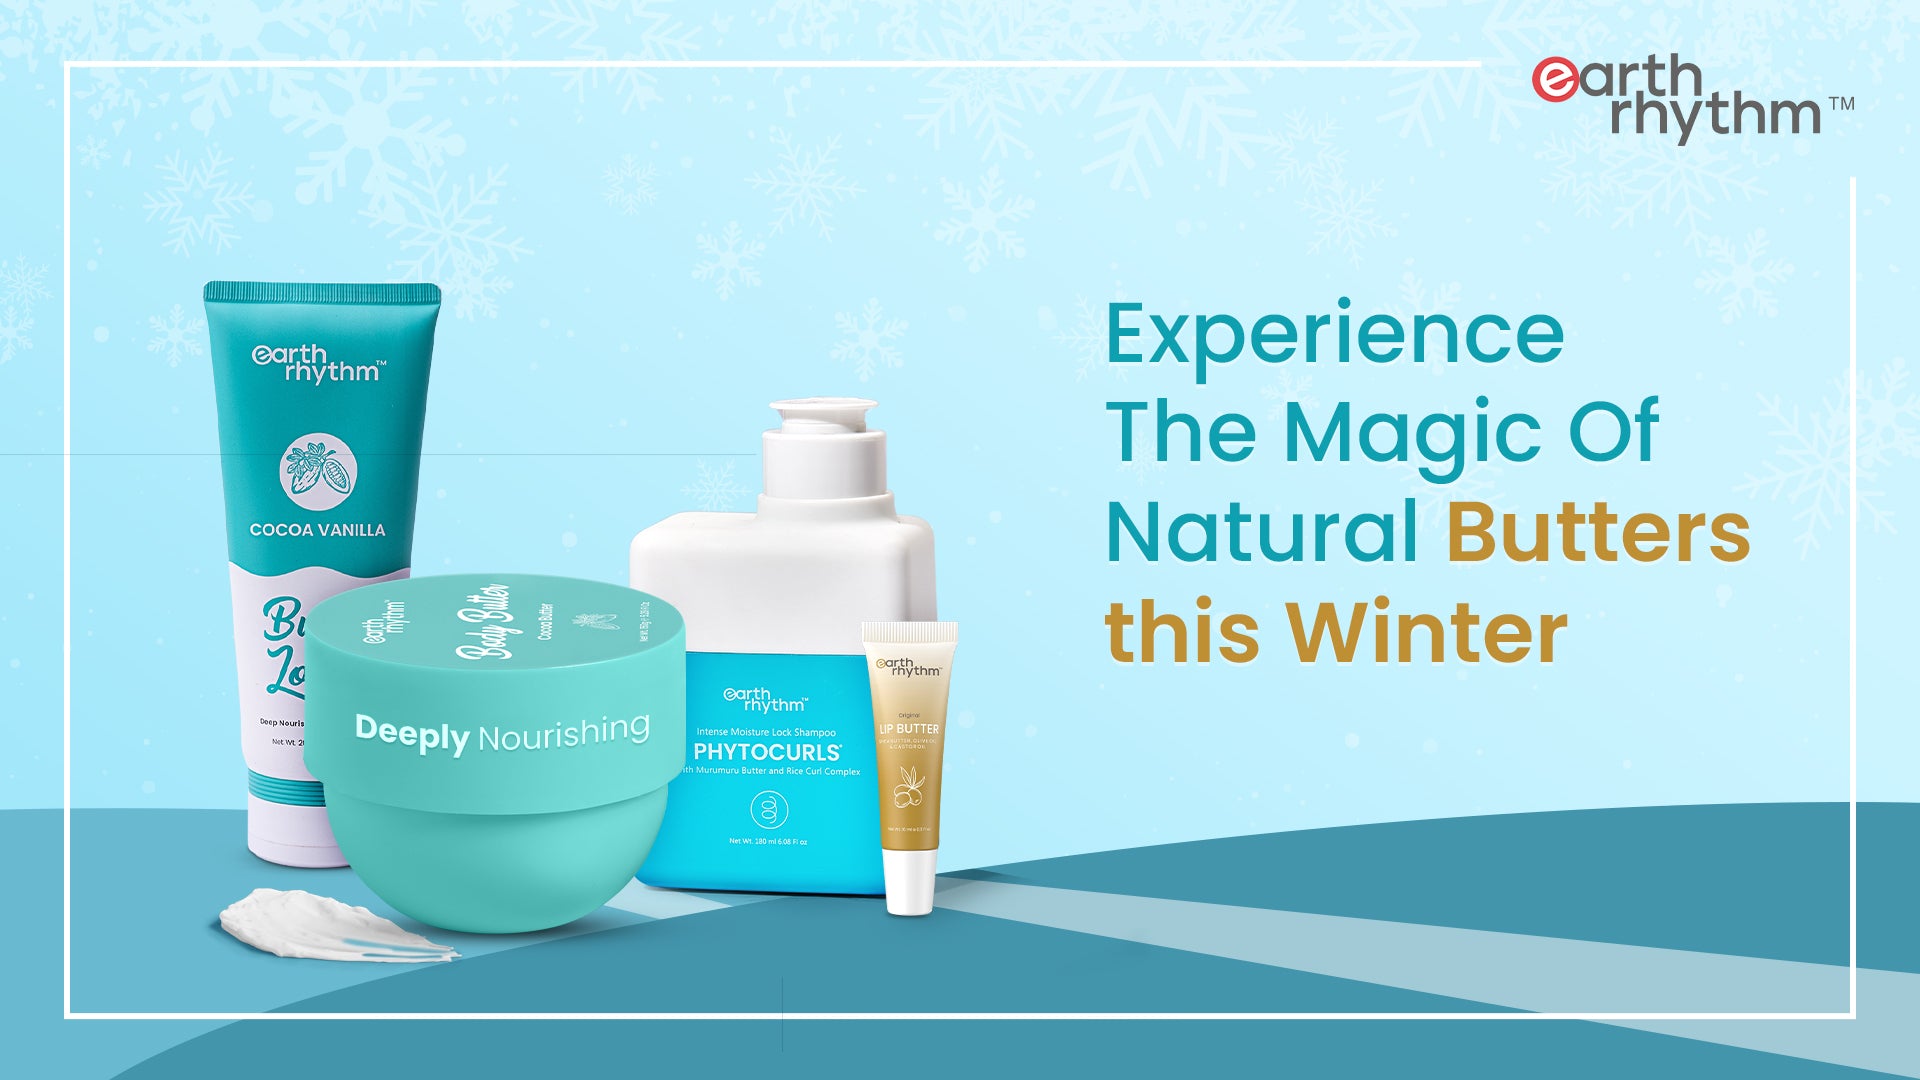 Experience the Magic of Natural Butters this Winter